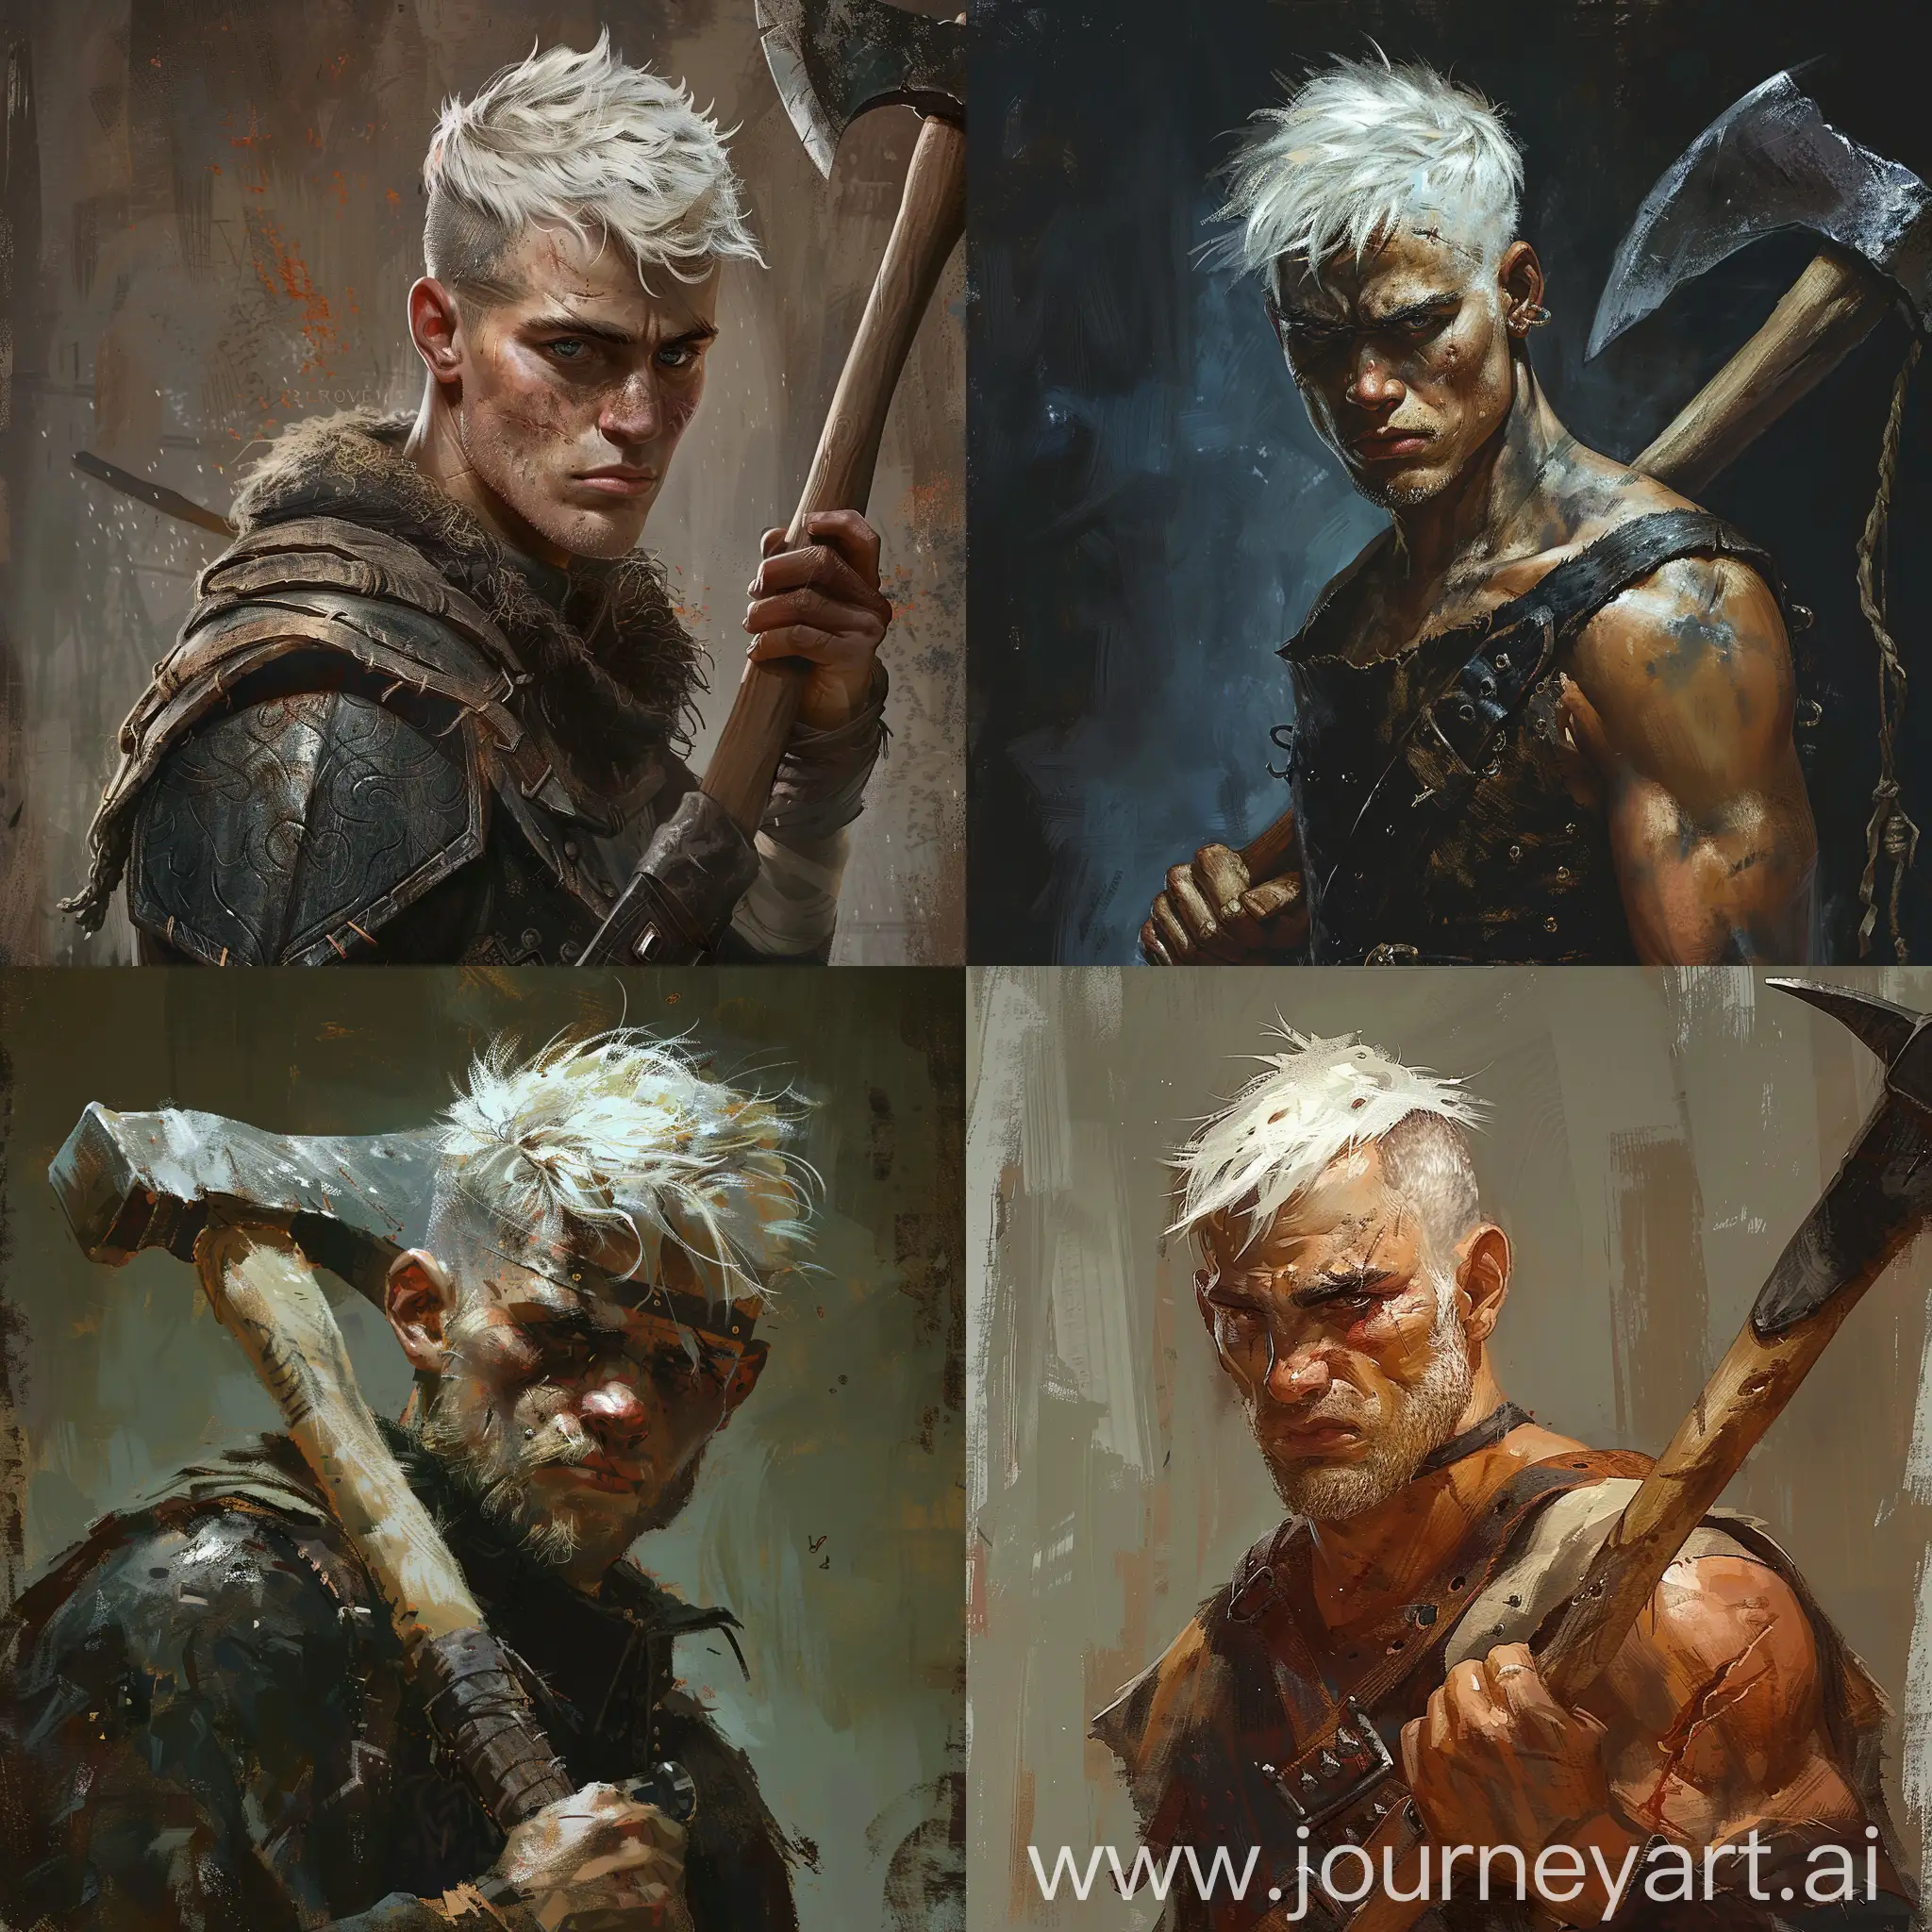 Warrior, menacing face, young, small beard, white hair, man, ax in right hand